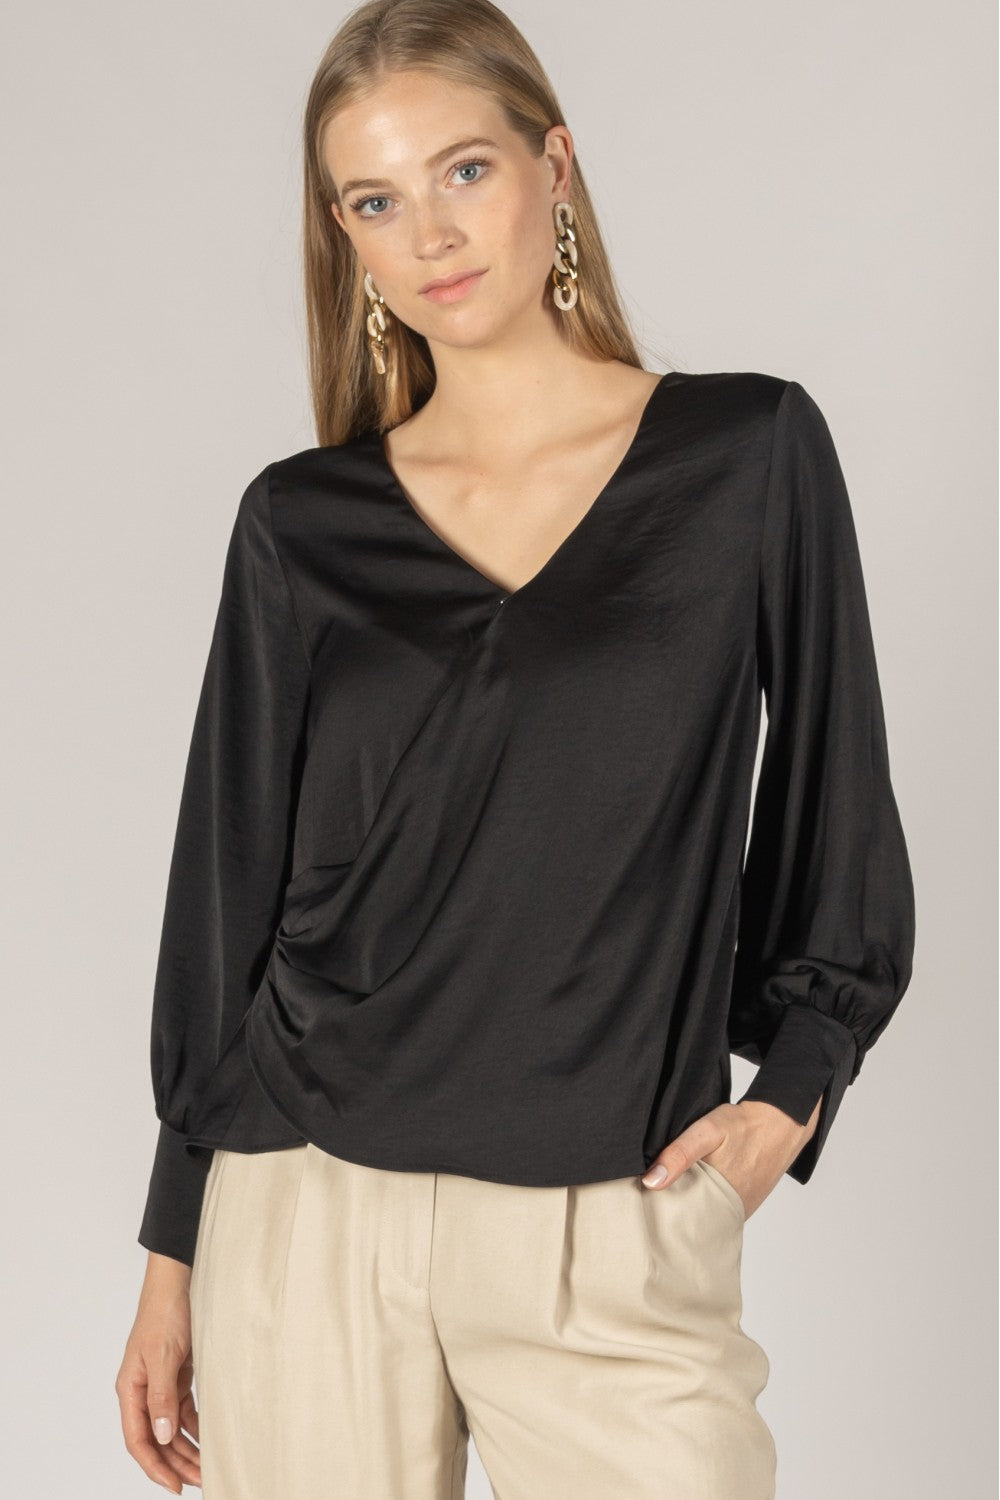 BEFORE YOU COLLECTION SILKY SATIN SURPLUS TOP